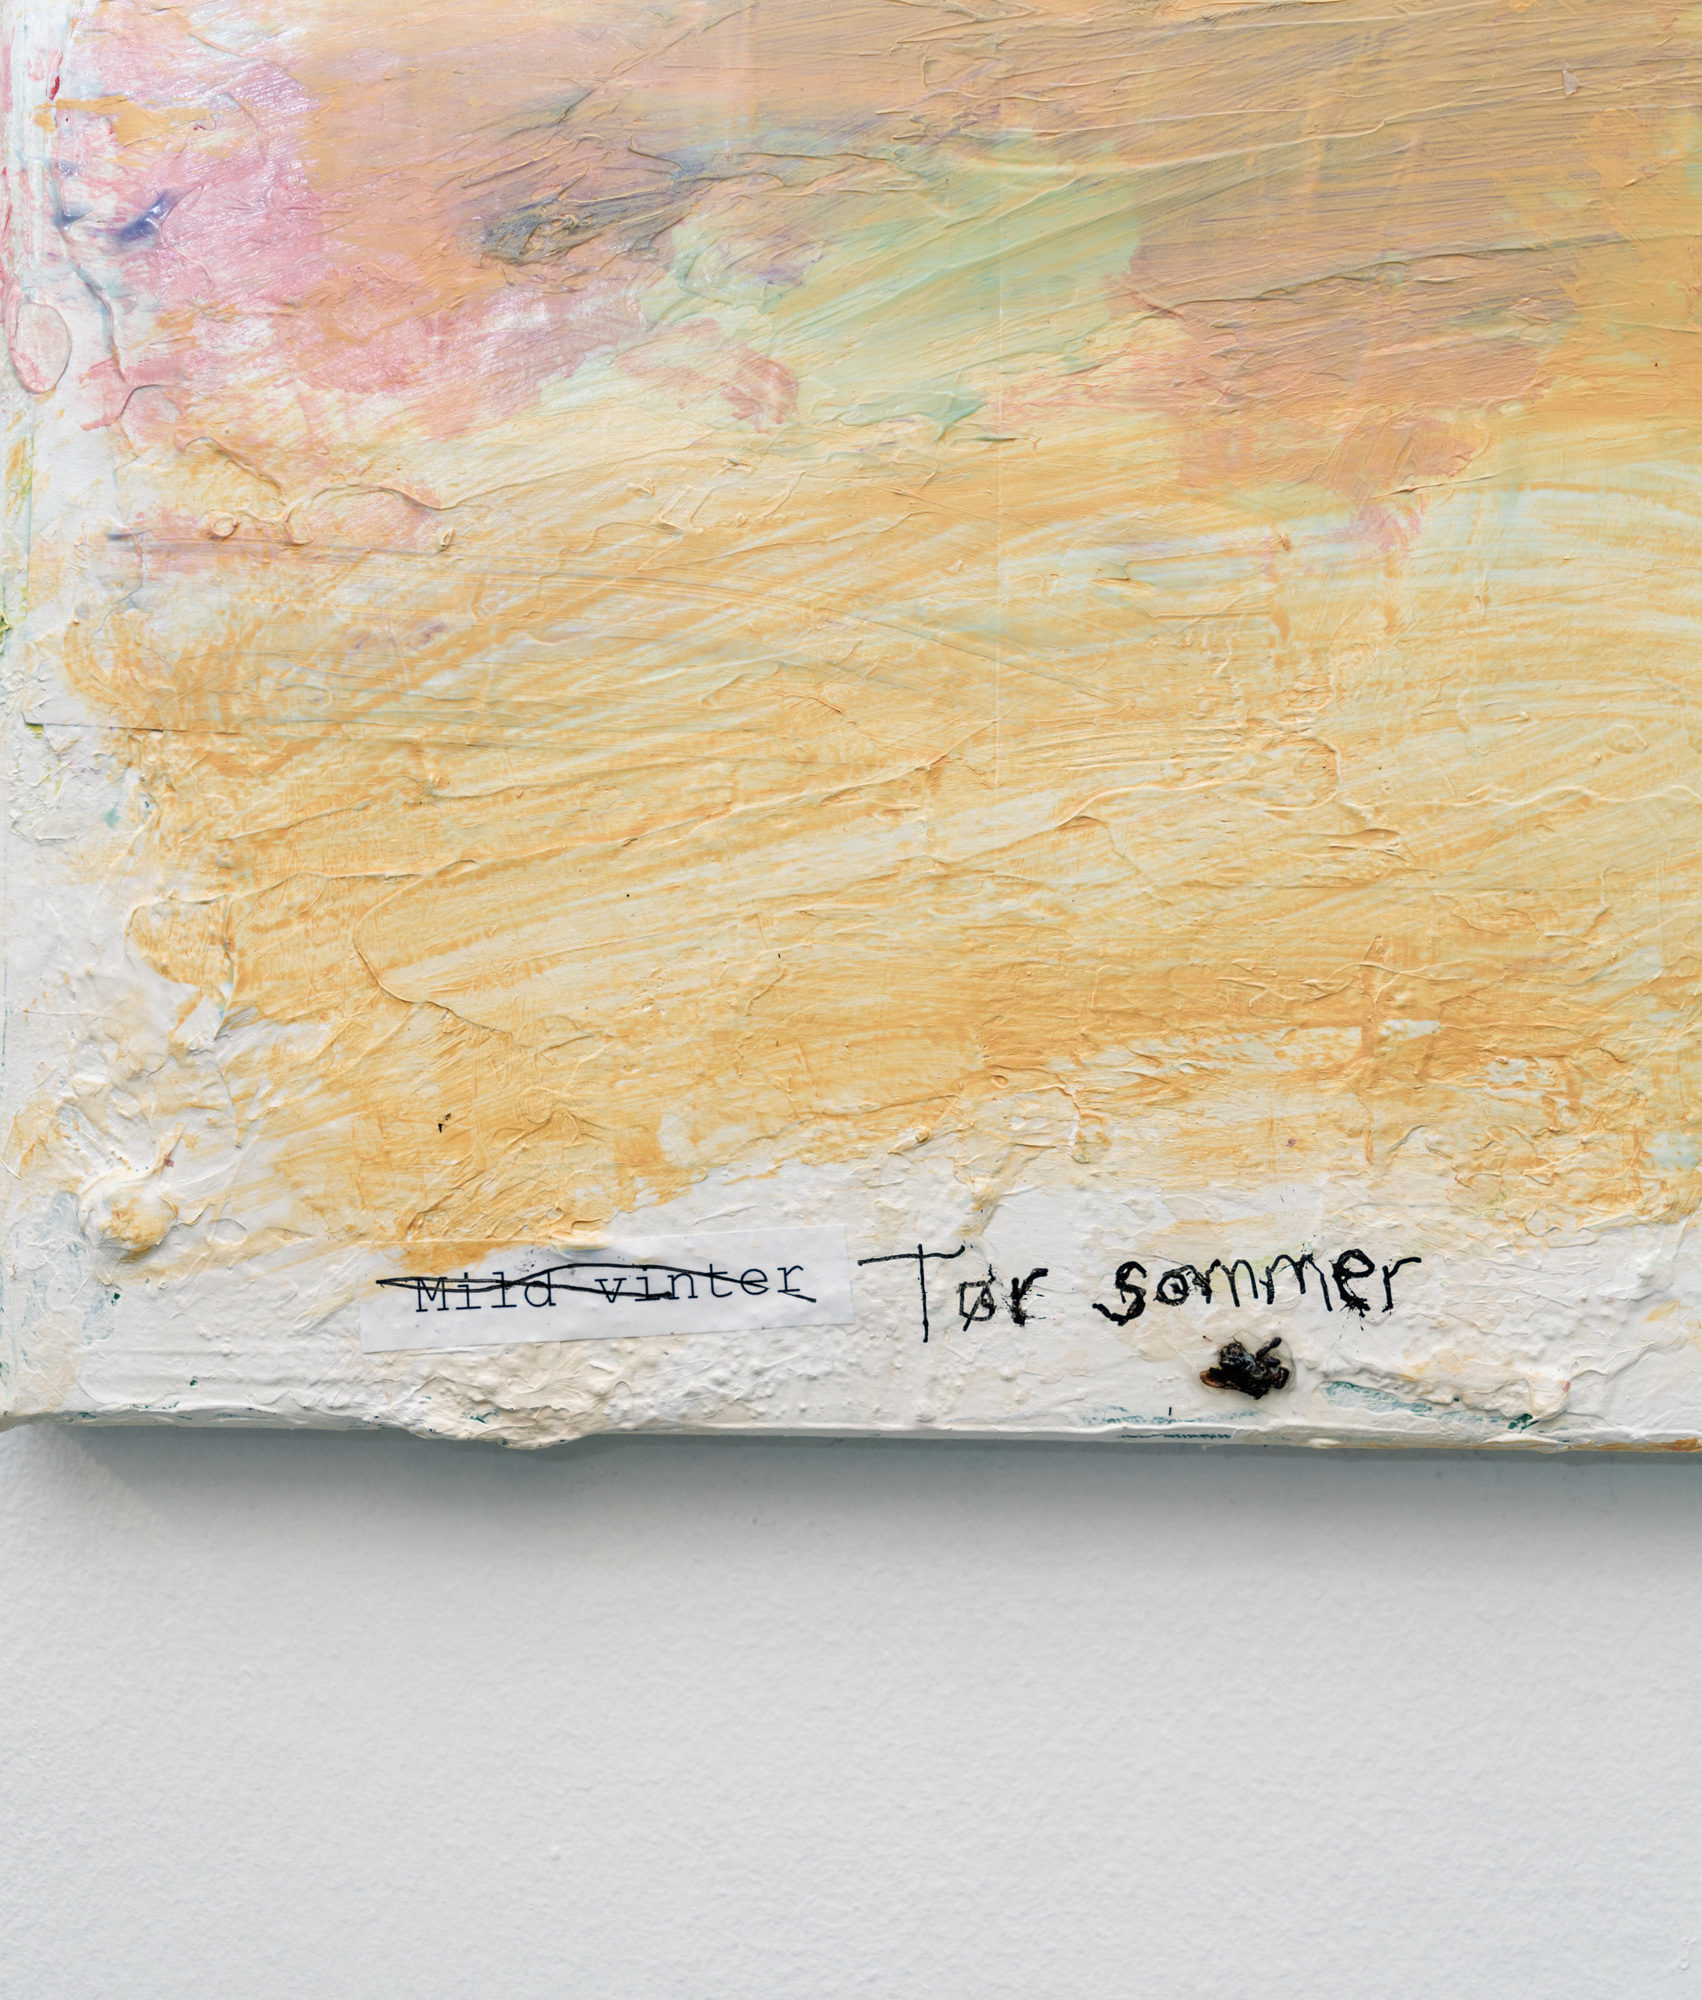 TÃ¸r Sommer (Dry Summer), 2023 (detail) Acrylic, bills, pen, dead fly and ink jet on canvas 60 x 50 cm